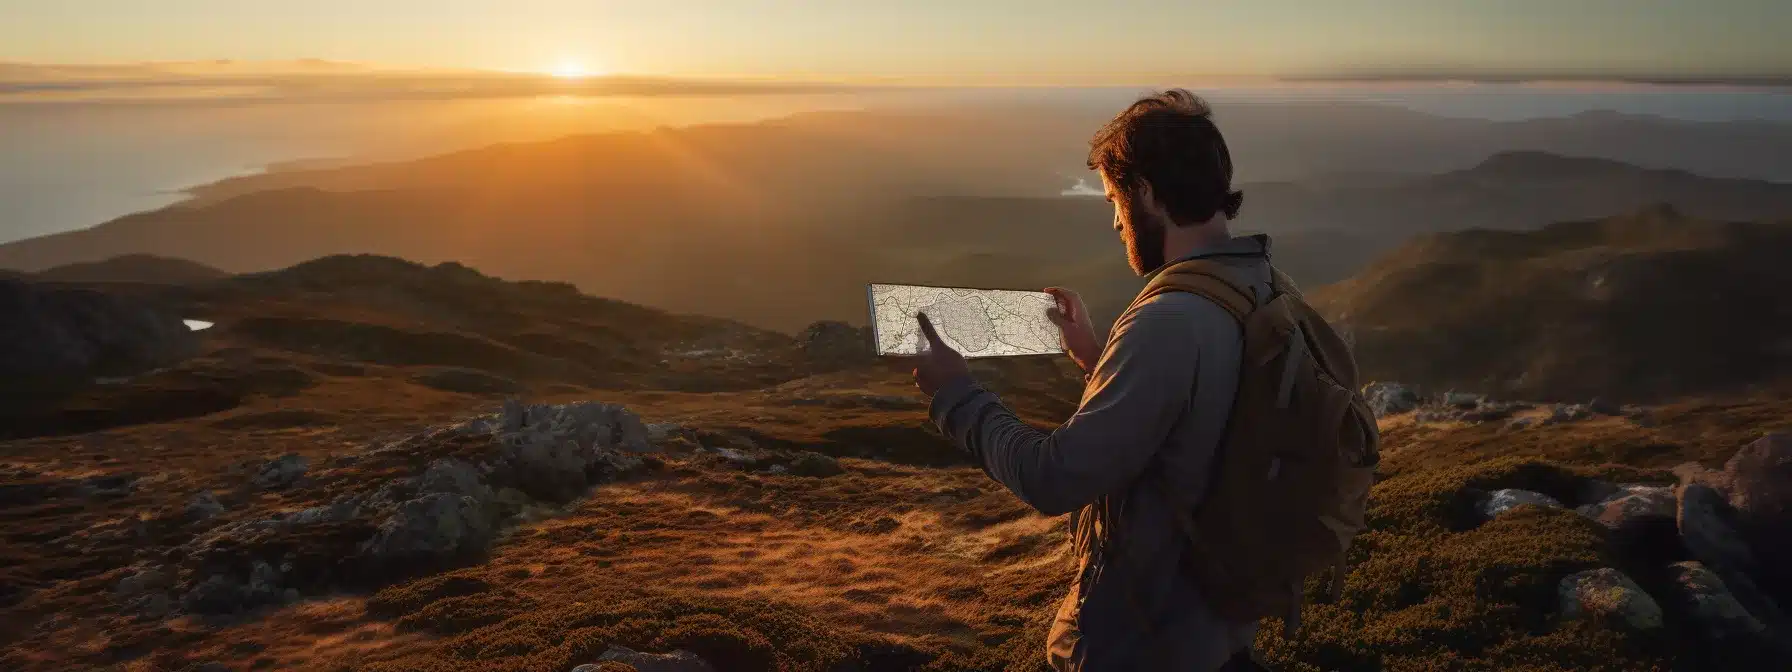 A Person Holding A Compass And A Map, Examining And Adjusting Them While Standing On A Cliff Overlooking A Vast Landscape.